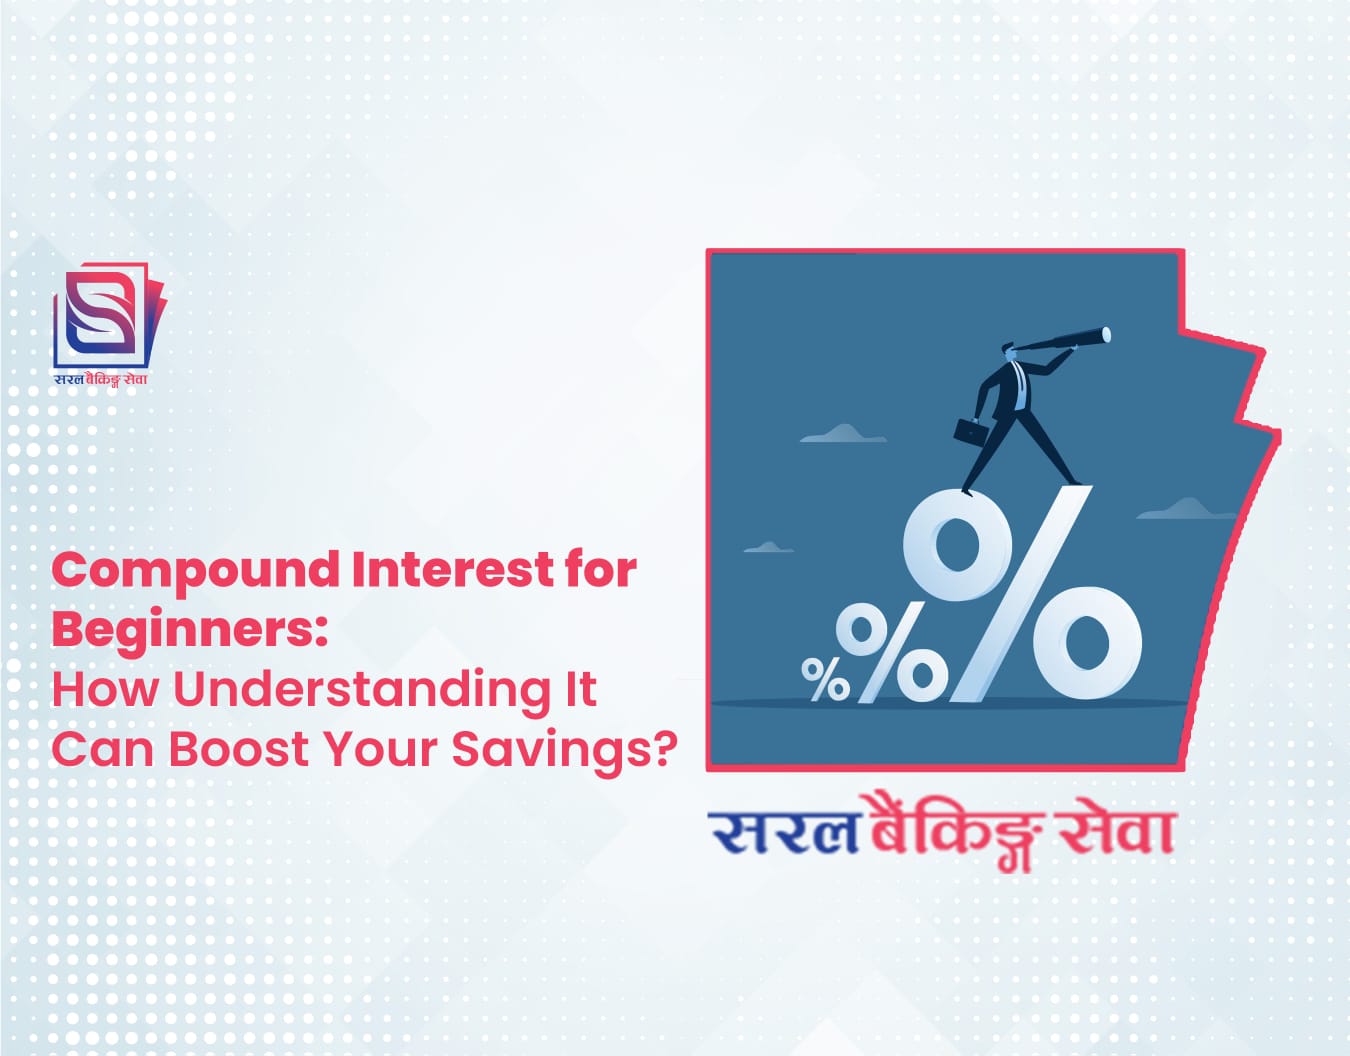 Compound Interest for Beginners: How Understanding It Can Boost Your Savings?